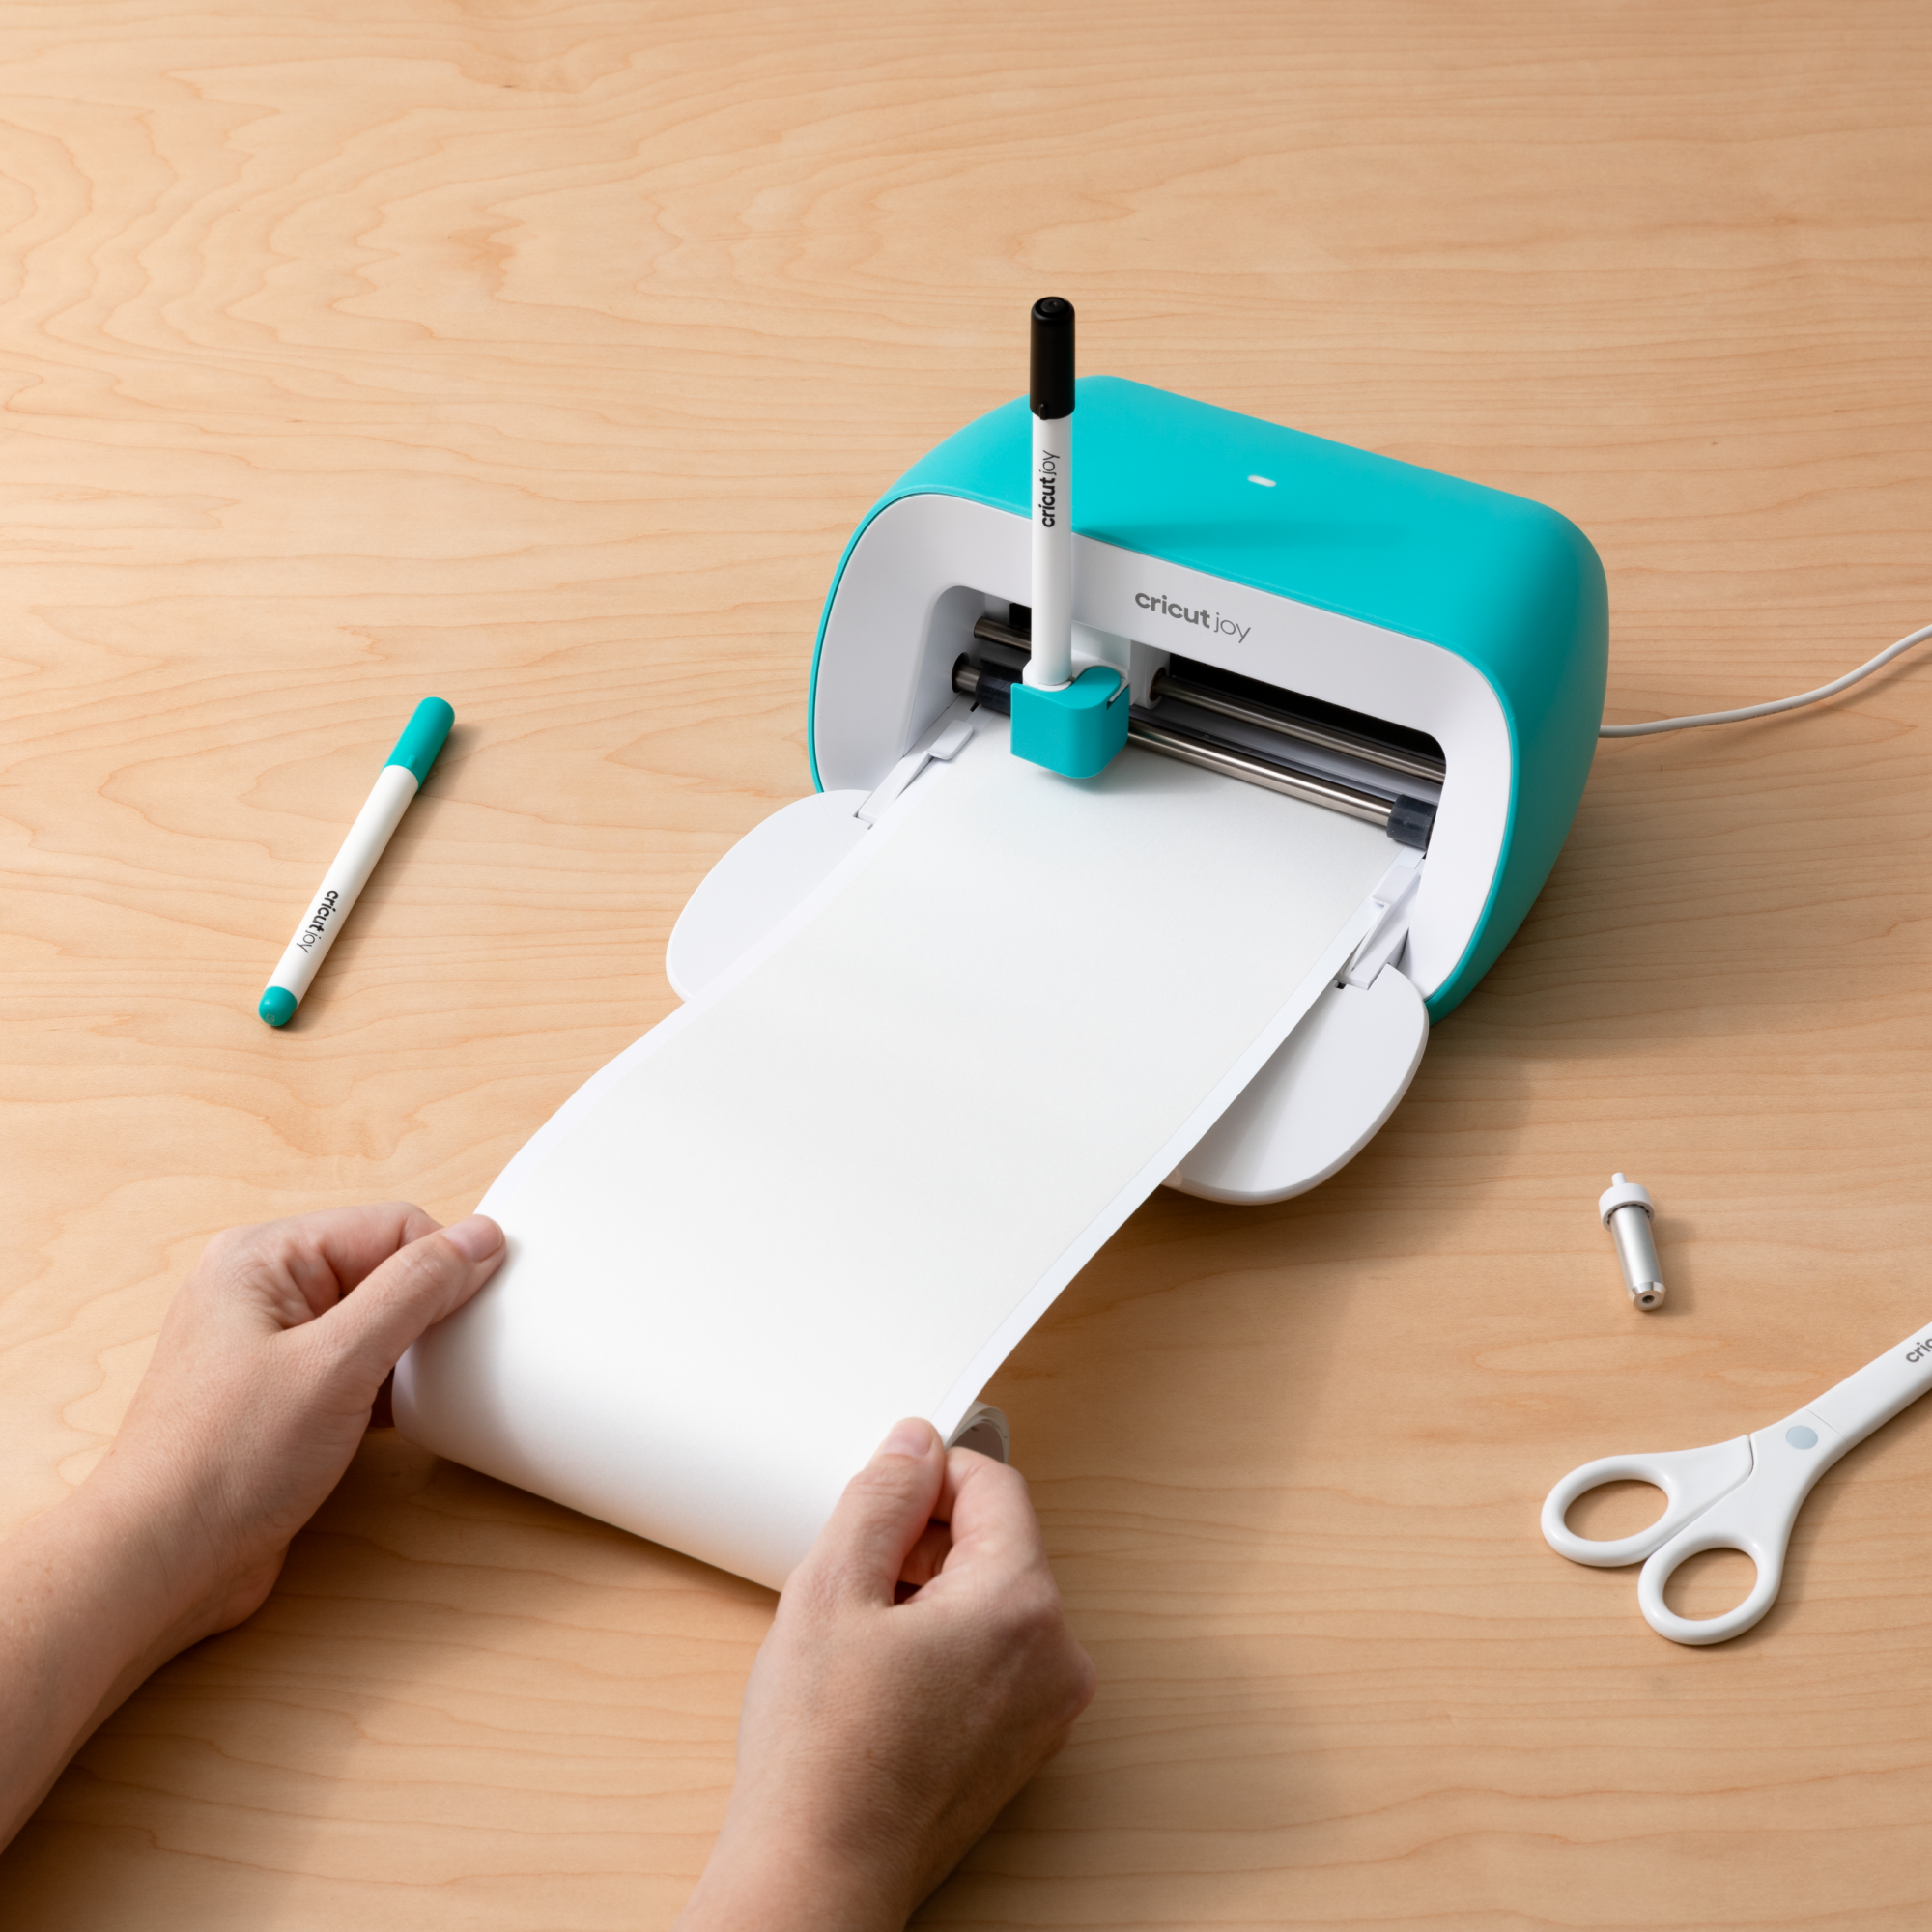 What is Cricut Joy & what can I do with it?